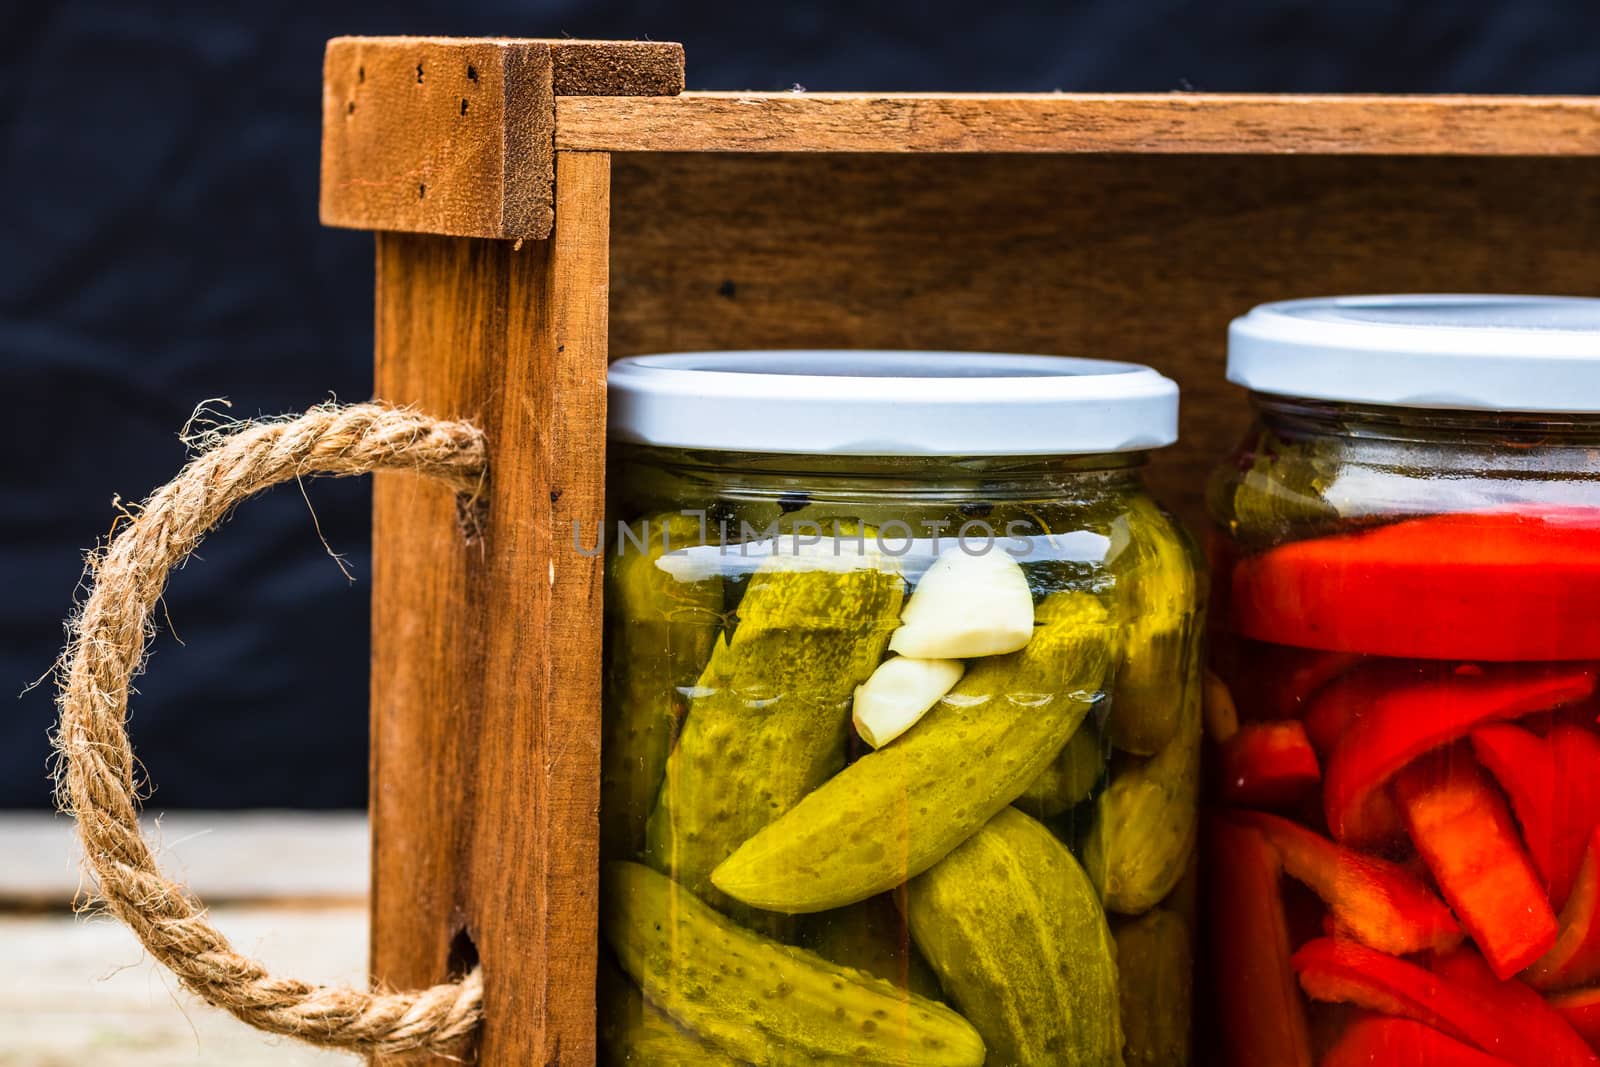 Wooden crate with glass jars with pickled red bell peppers and p by vladispas